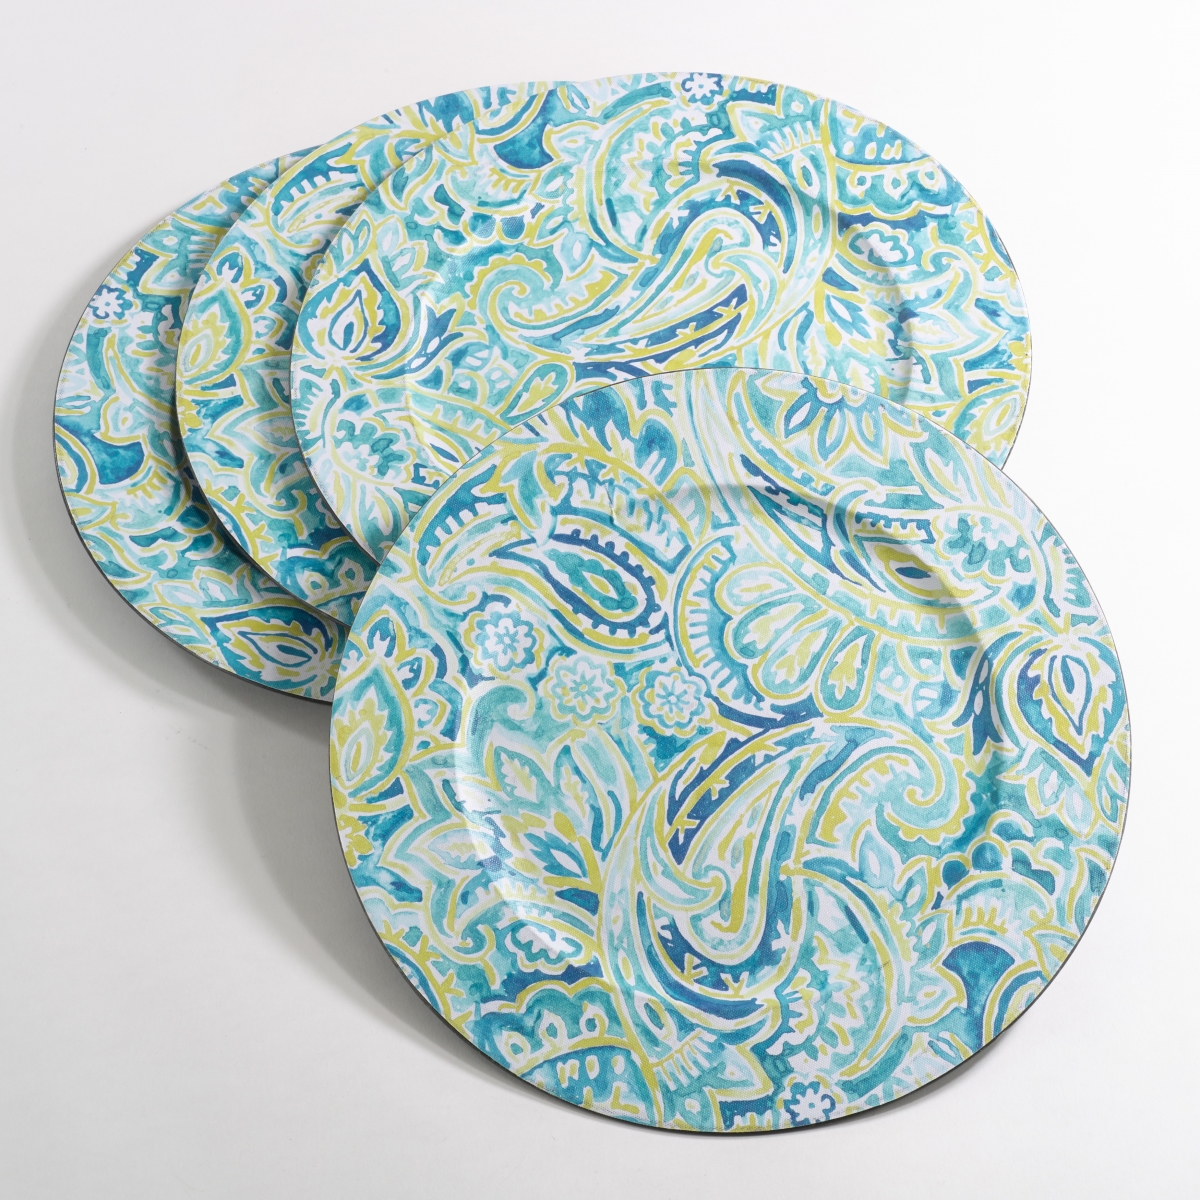 Ch150.m14r 14 In. Round Decorative Paisley Design Charger Plate, Multi Color - Set Of 4